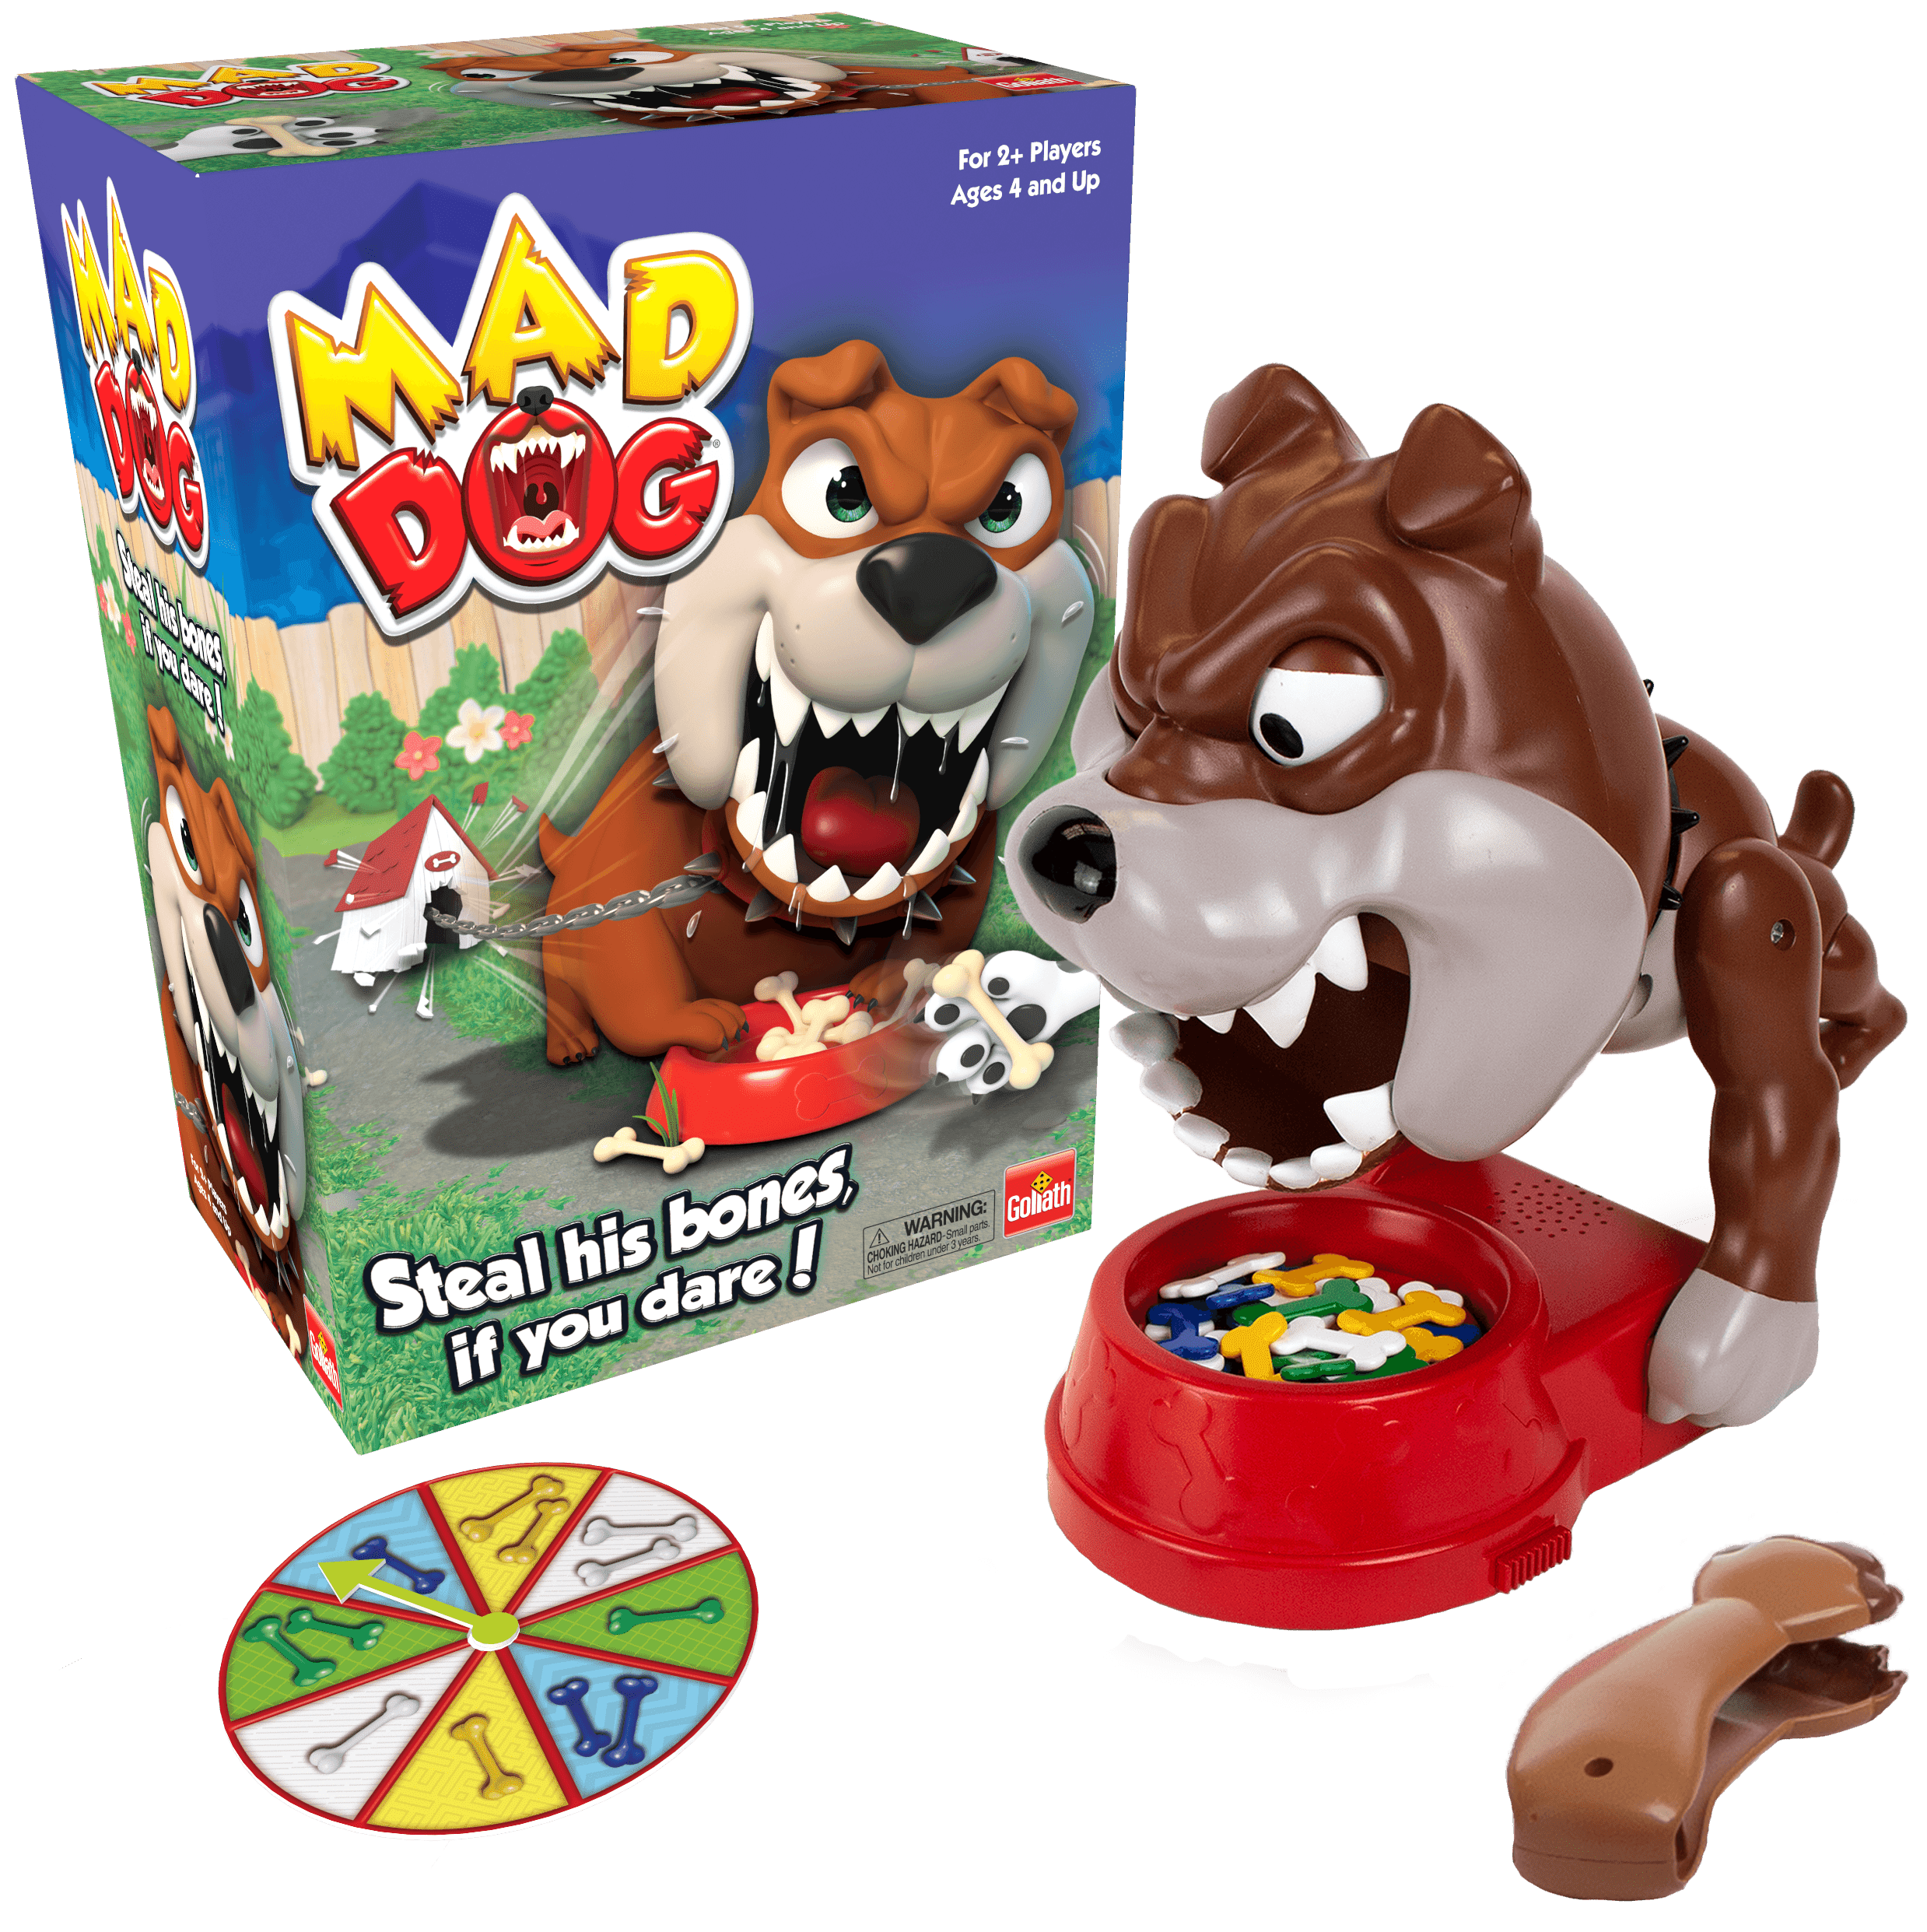 Mad Dog Game by Goliath - Steal His Bones If You Dare - But Don't